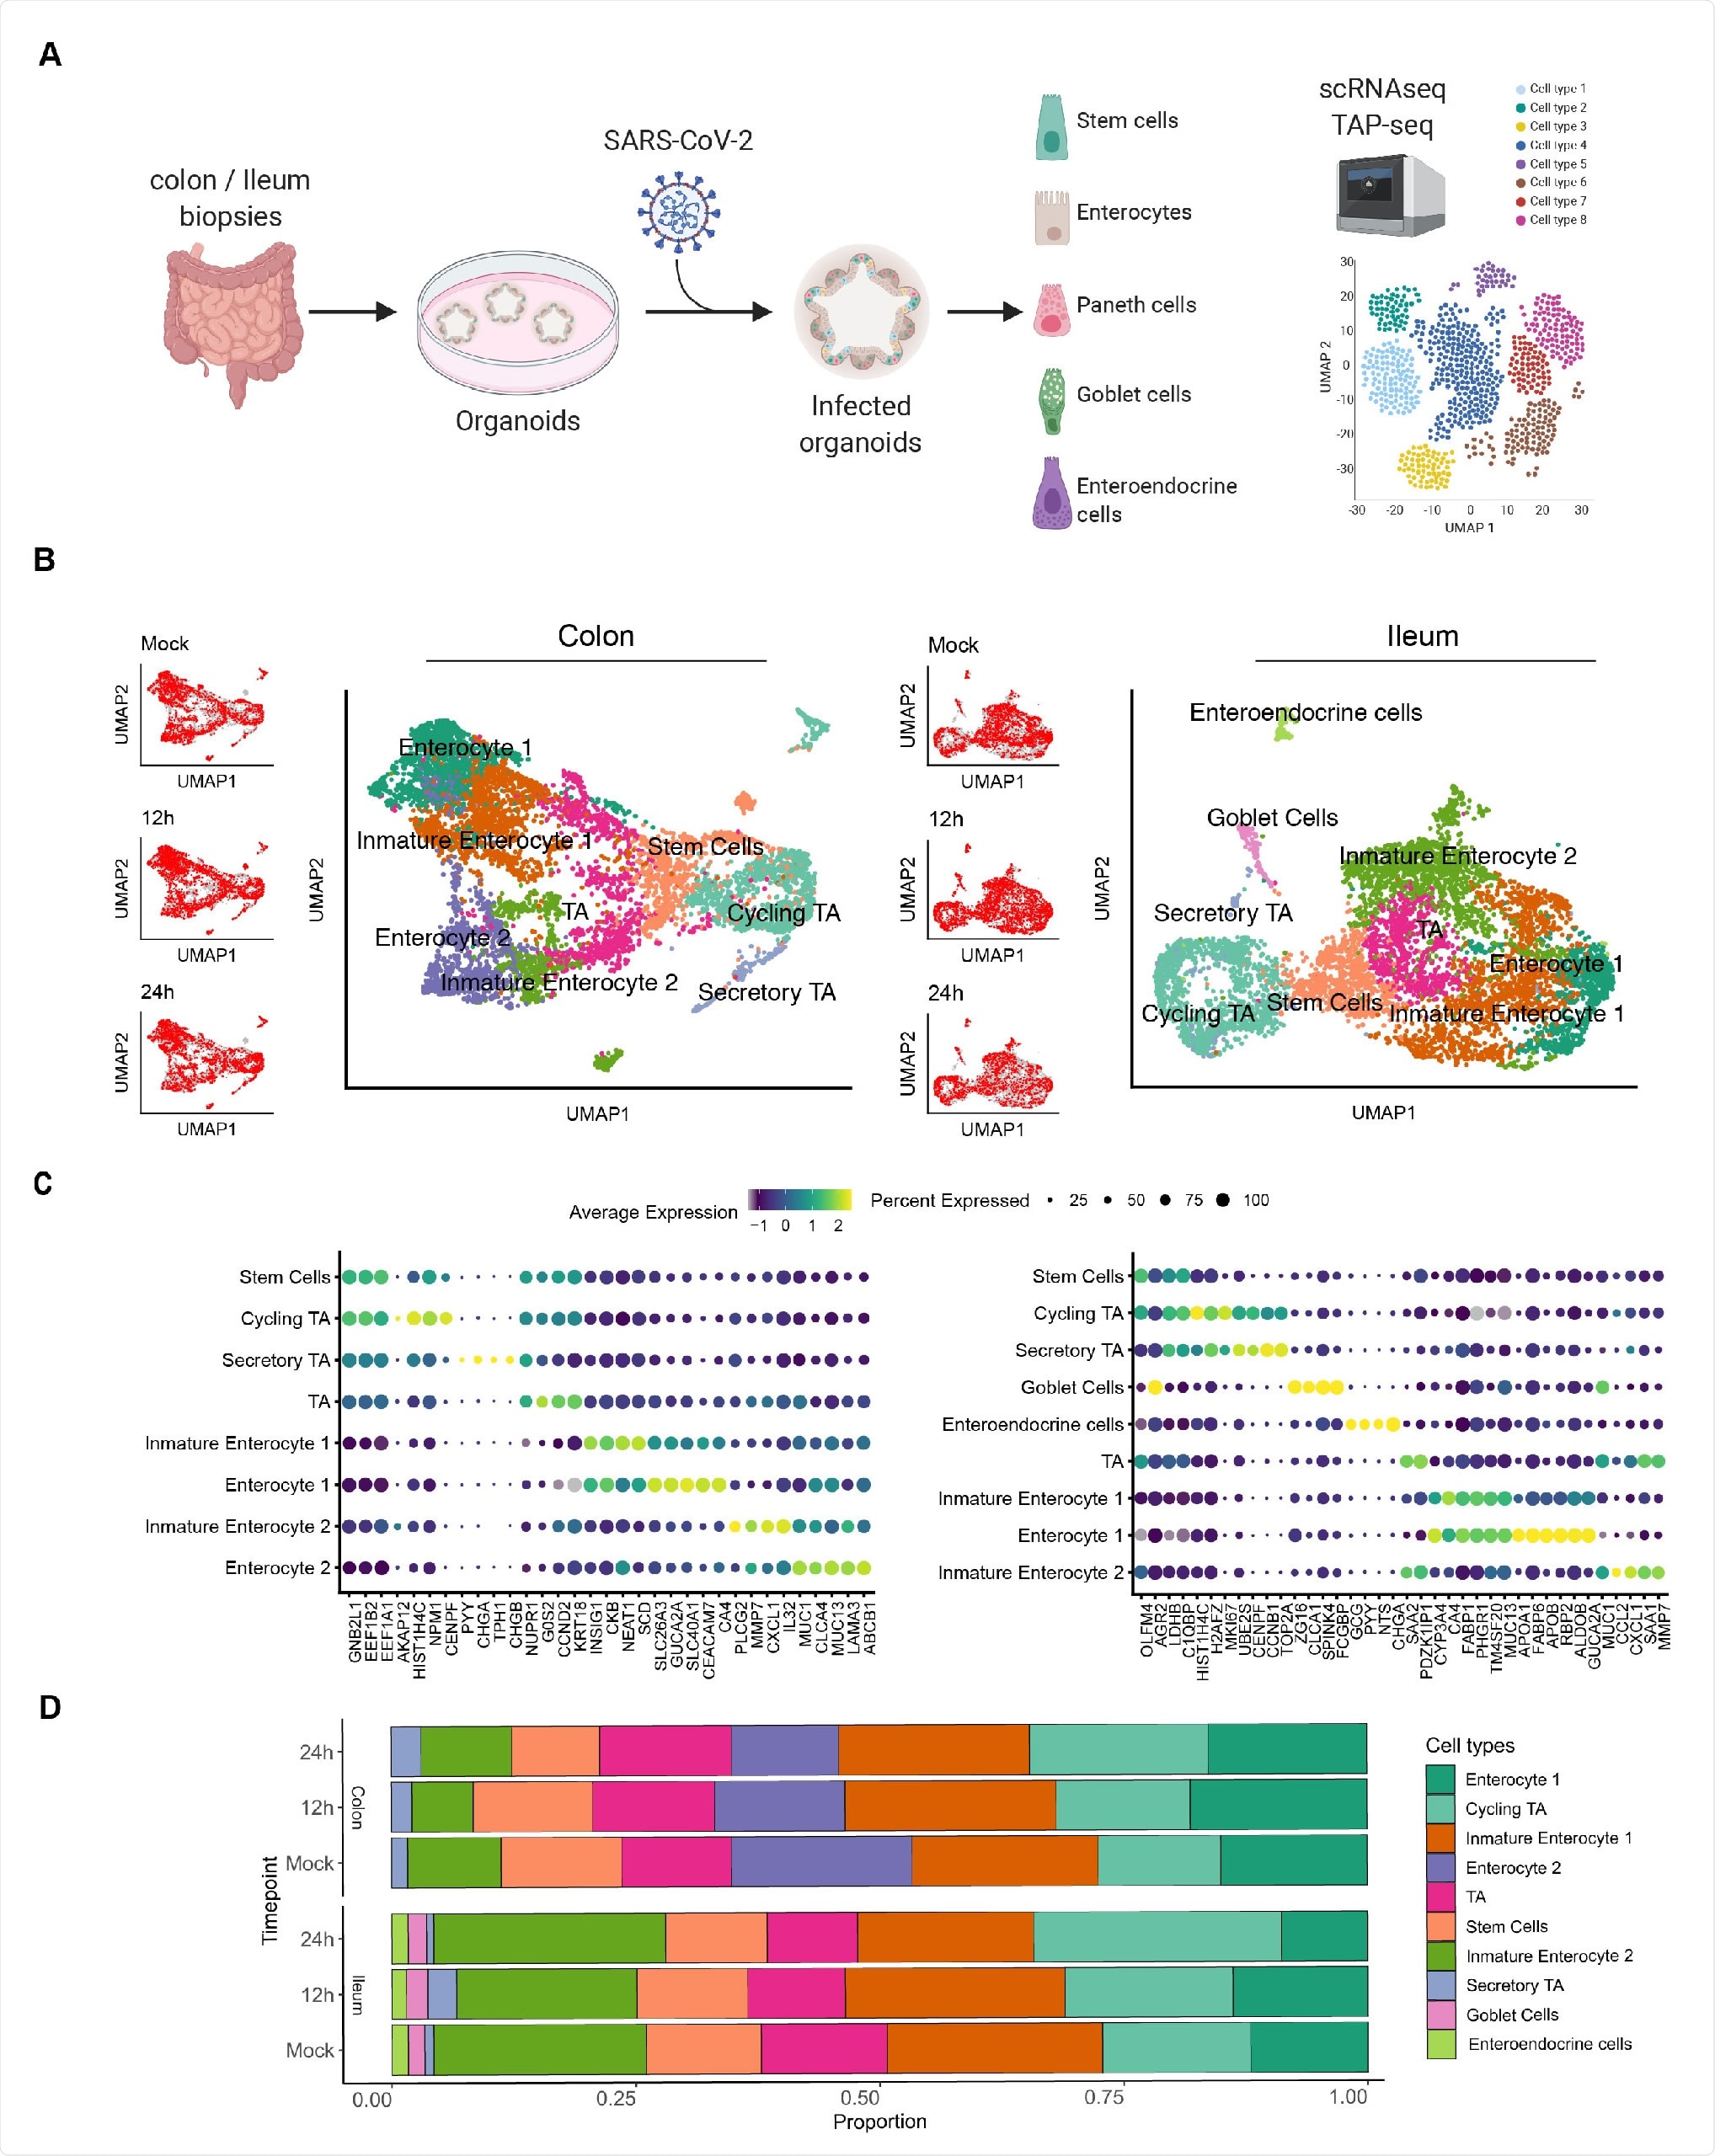 Single cell sequencing of SARS-CoV-2 infected colon- and ileum-derived human organoids. A. Schematic representation of the experimental workflow. 625 B. Uniform manifold approximation and projection (UMAP) embedding of single-cell RNA-Seq data from mock and SARS-CoV-2 infected colon-derived (left panels) and ileum-derived (right panels) organoids colored according to the cell type. Small insets represent the UMAP for mock and infected organoids at 12 and 24 hpi. C. Dot plot of the top marker genes for each cell type for (left) colon and (right) ileum-derived organoids. The dot size represents the percentage of cells expressing the gene; the color represents the average expression across the cell type. D. Bar plot displaying the proportion of each cell type in mock and infected organoids (12 and 24 hpi).